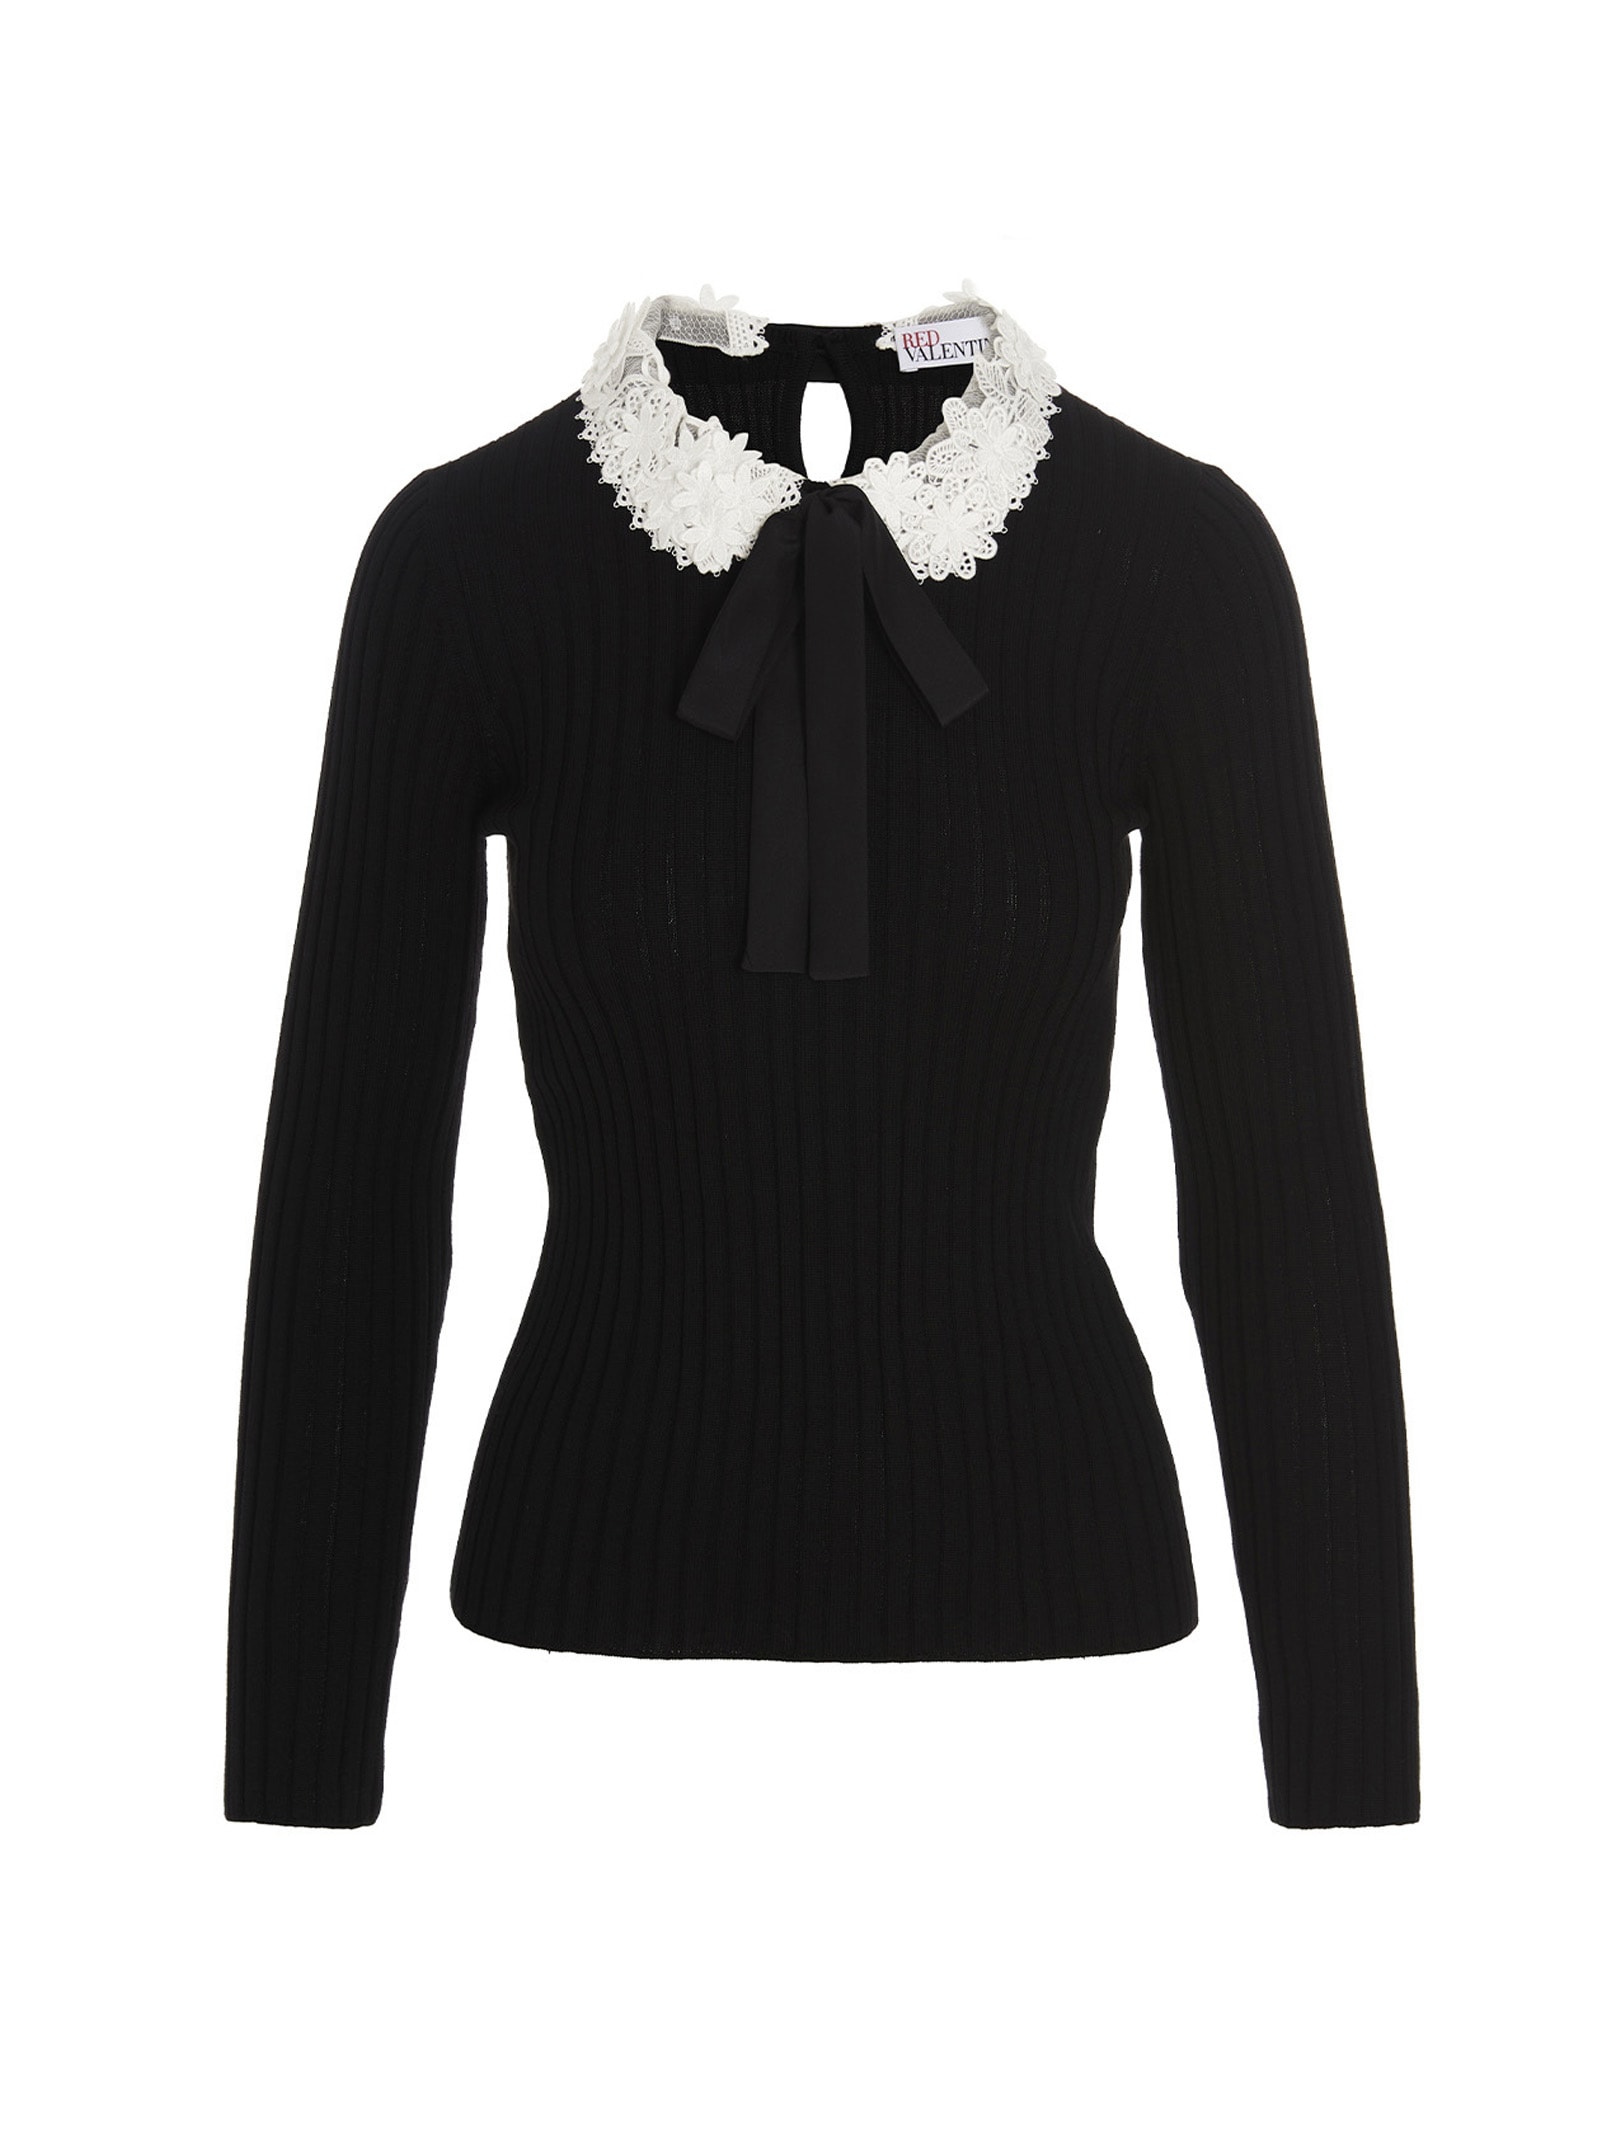 RED Valentino Lace Collar Sweater